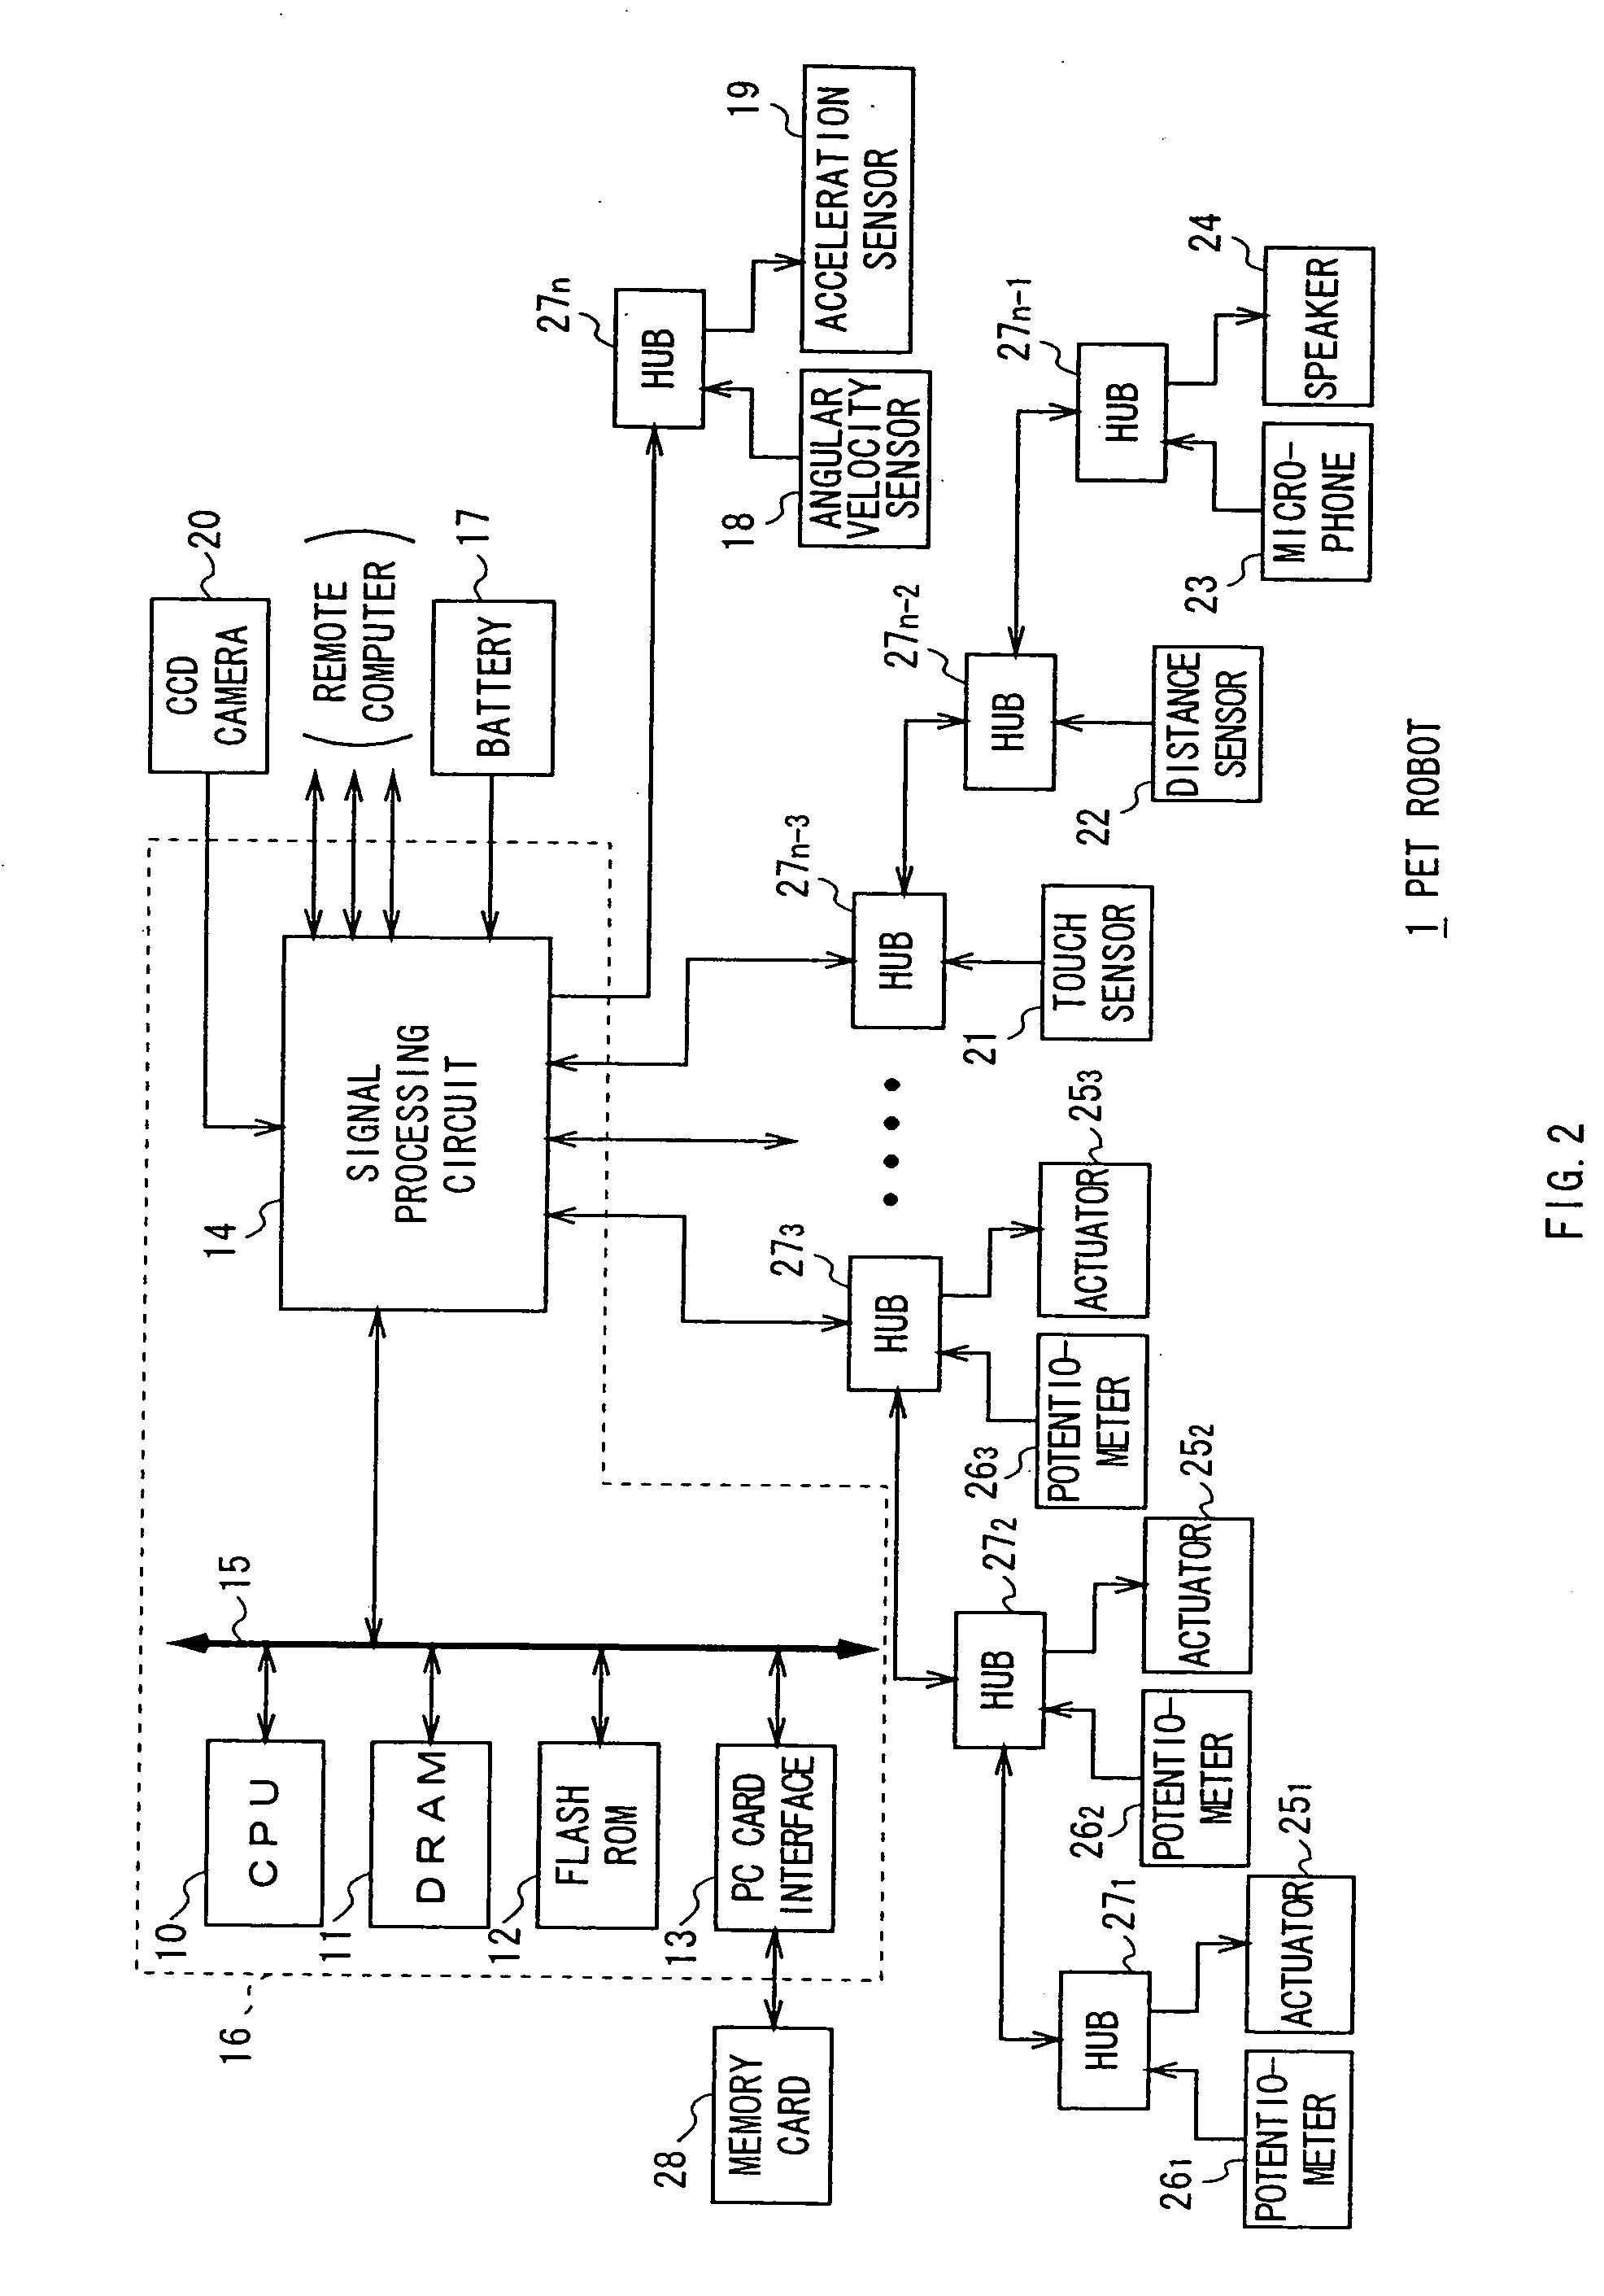 Robot apparatus and control method therefor, and robot character discriminating method